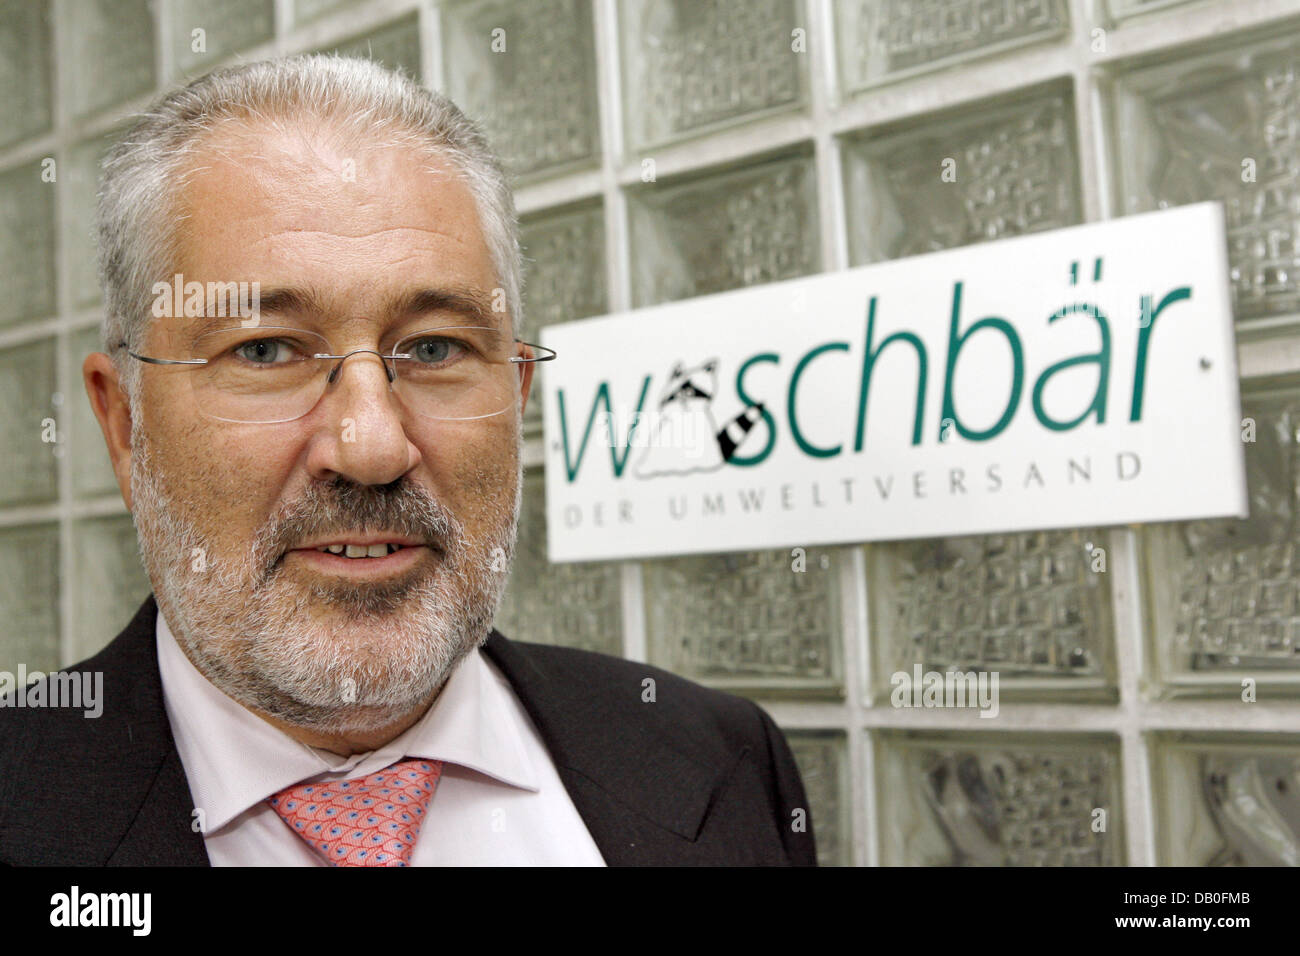 The owner and managing director of eco mailorder service company  'Waschbaer', Ernst Schuetz, smiles into the camera in front of the company  logo in Freiburg, Germany, 21 August 2007. Schuetz is responsible